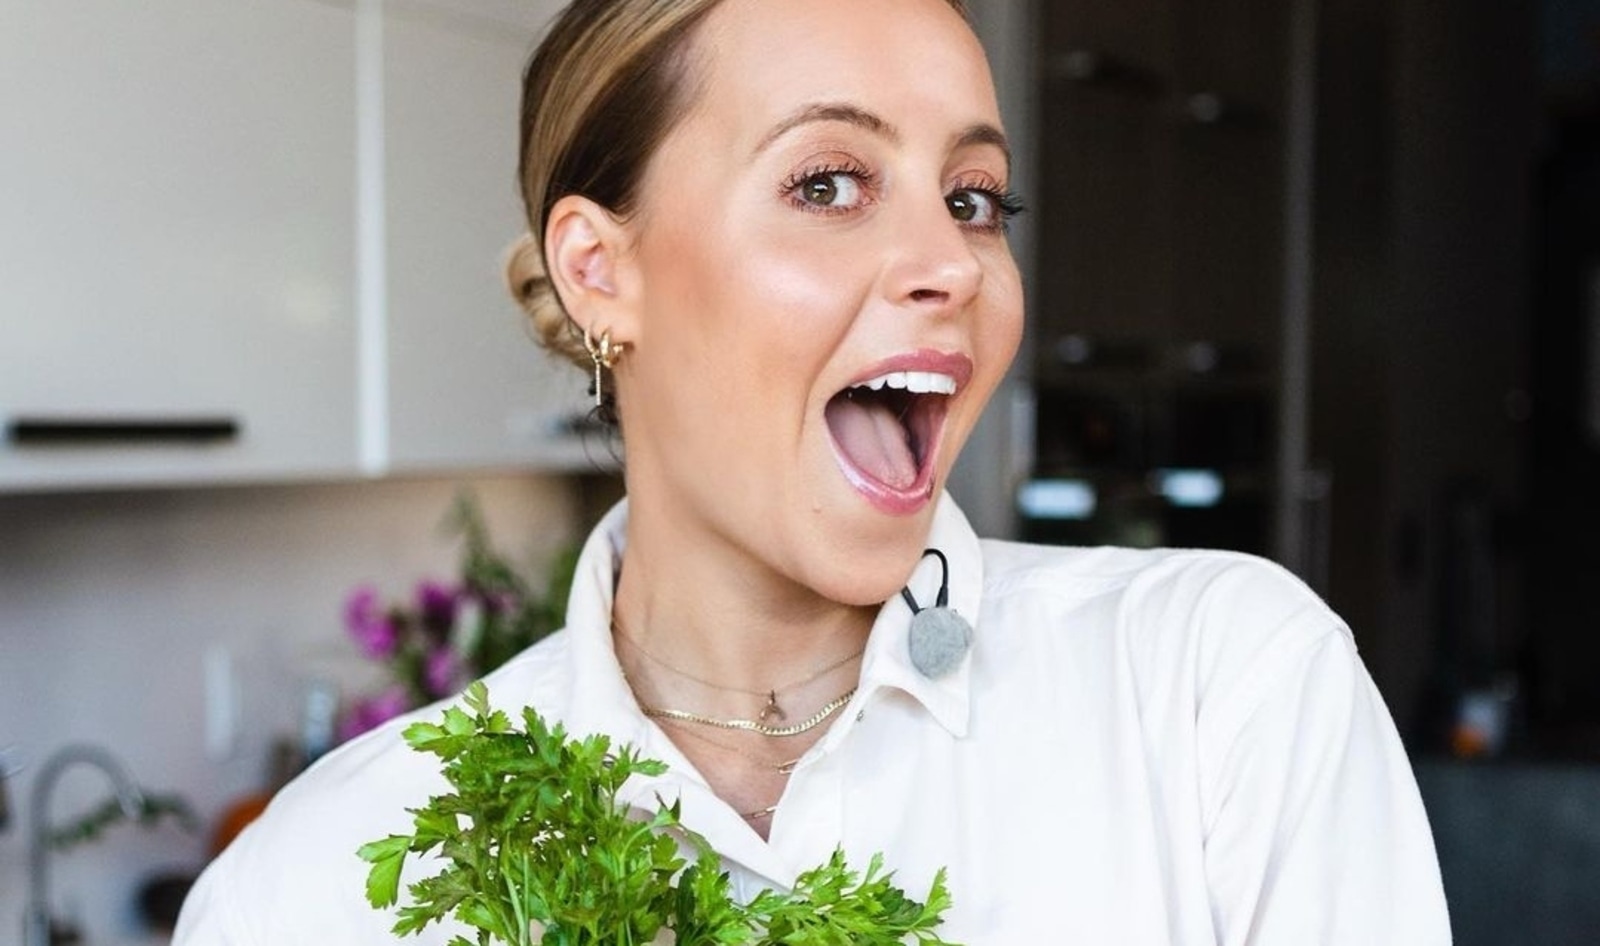 Why Brooke "Chef Bae" Baevsky Loves Pumfu, a Protein-Packed, Soy-Free Alternative to Tofu